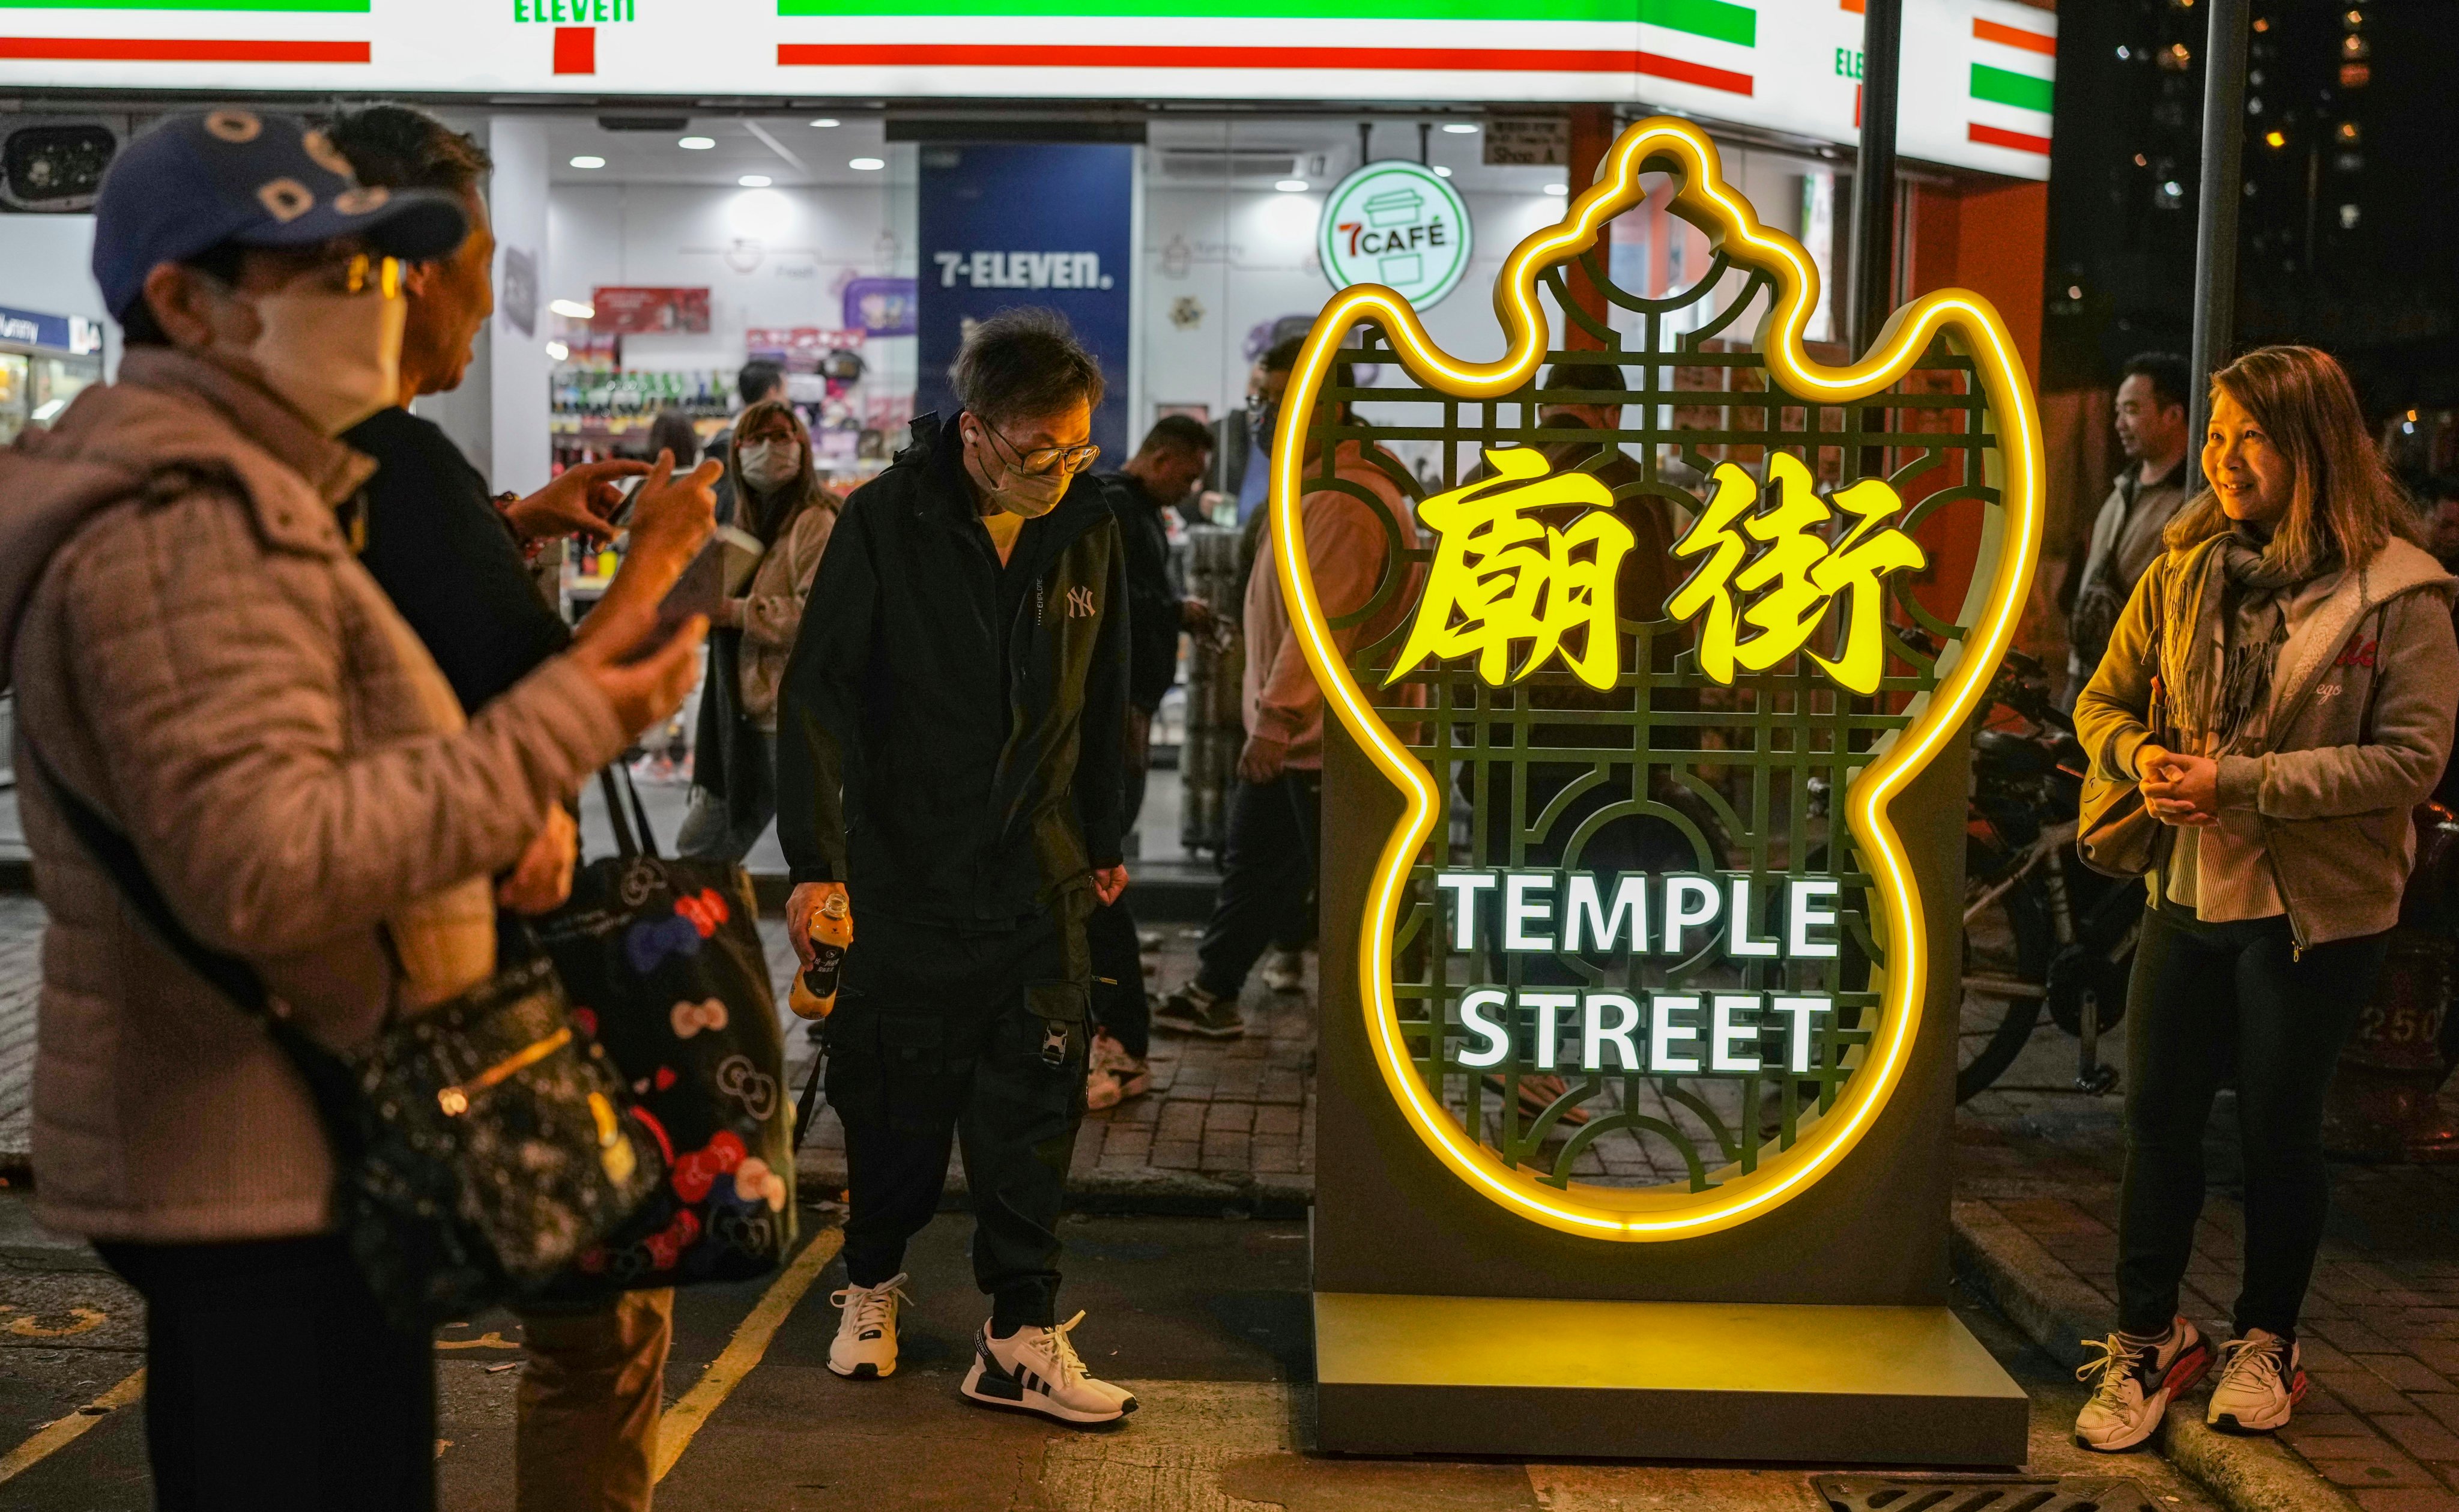 The revamped Temple Street night market in Yau Ma Tei, Kowloon, initially drew more shoppers, but most were local. Hong Kong has seen a further drop in tourists Photo: Elson LI